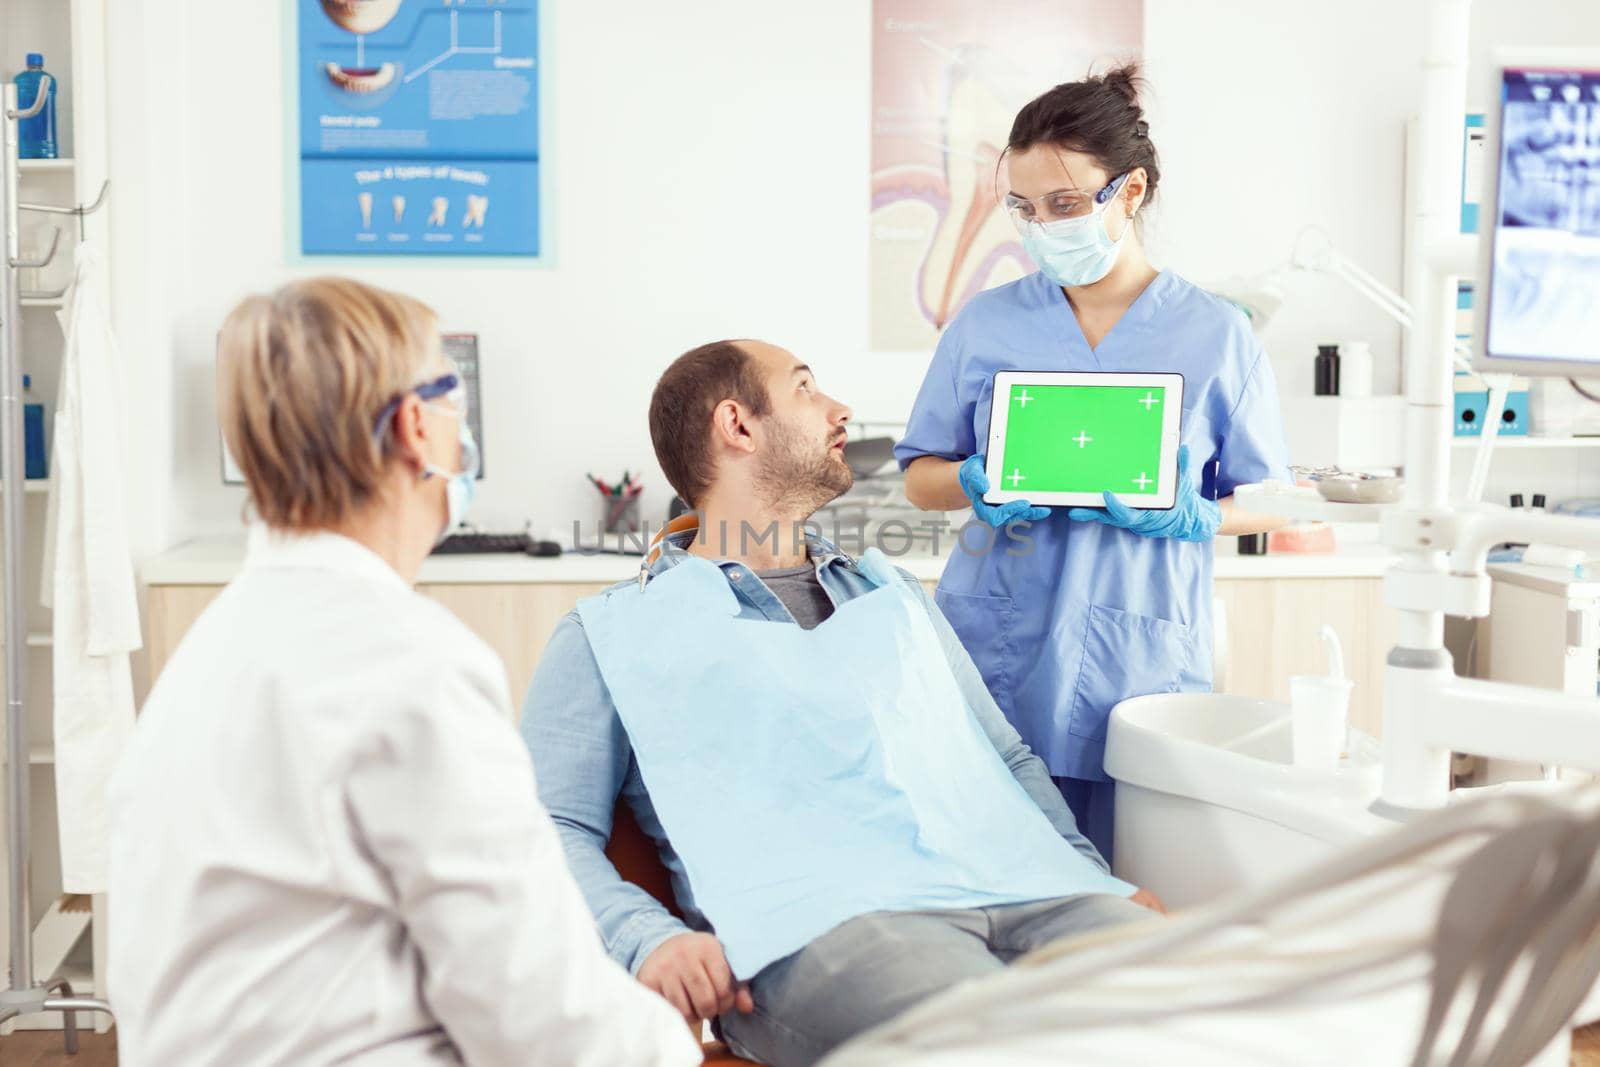 Sick patient looking at touchscreen gadget while speaking with stomatology senior doctor by DCStudio